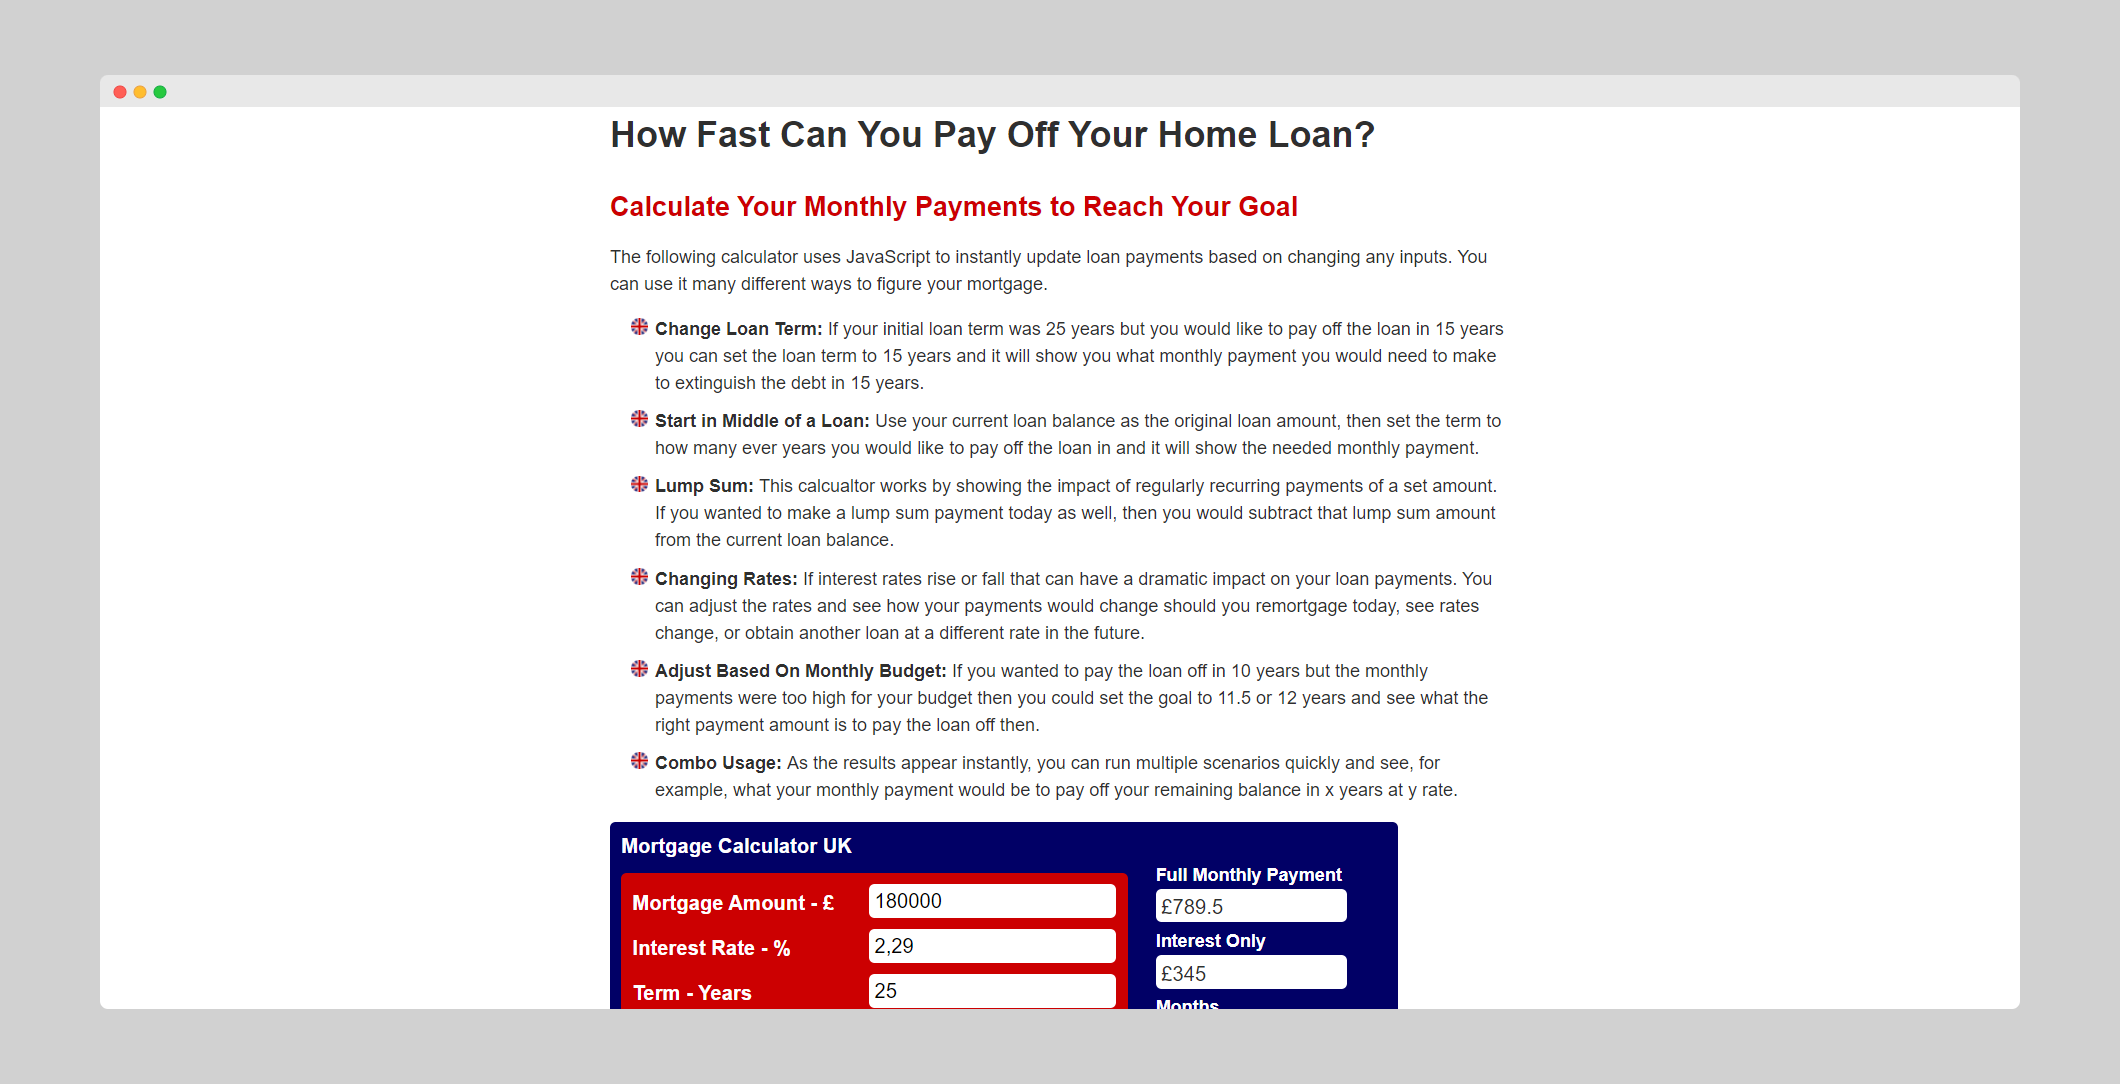 How Fast Can You Pay Off Your Home Loan